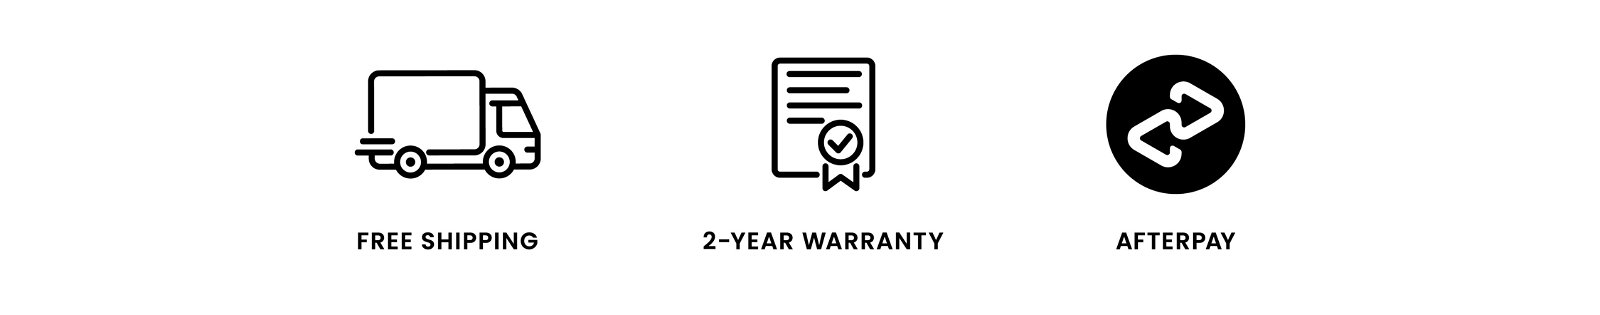 Free Shipping, 2-Year Warranty, Afterpay